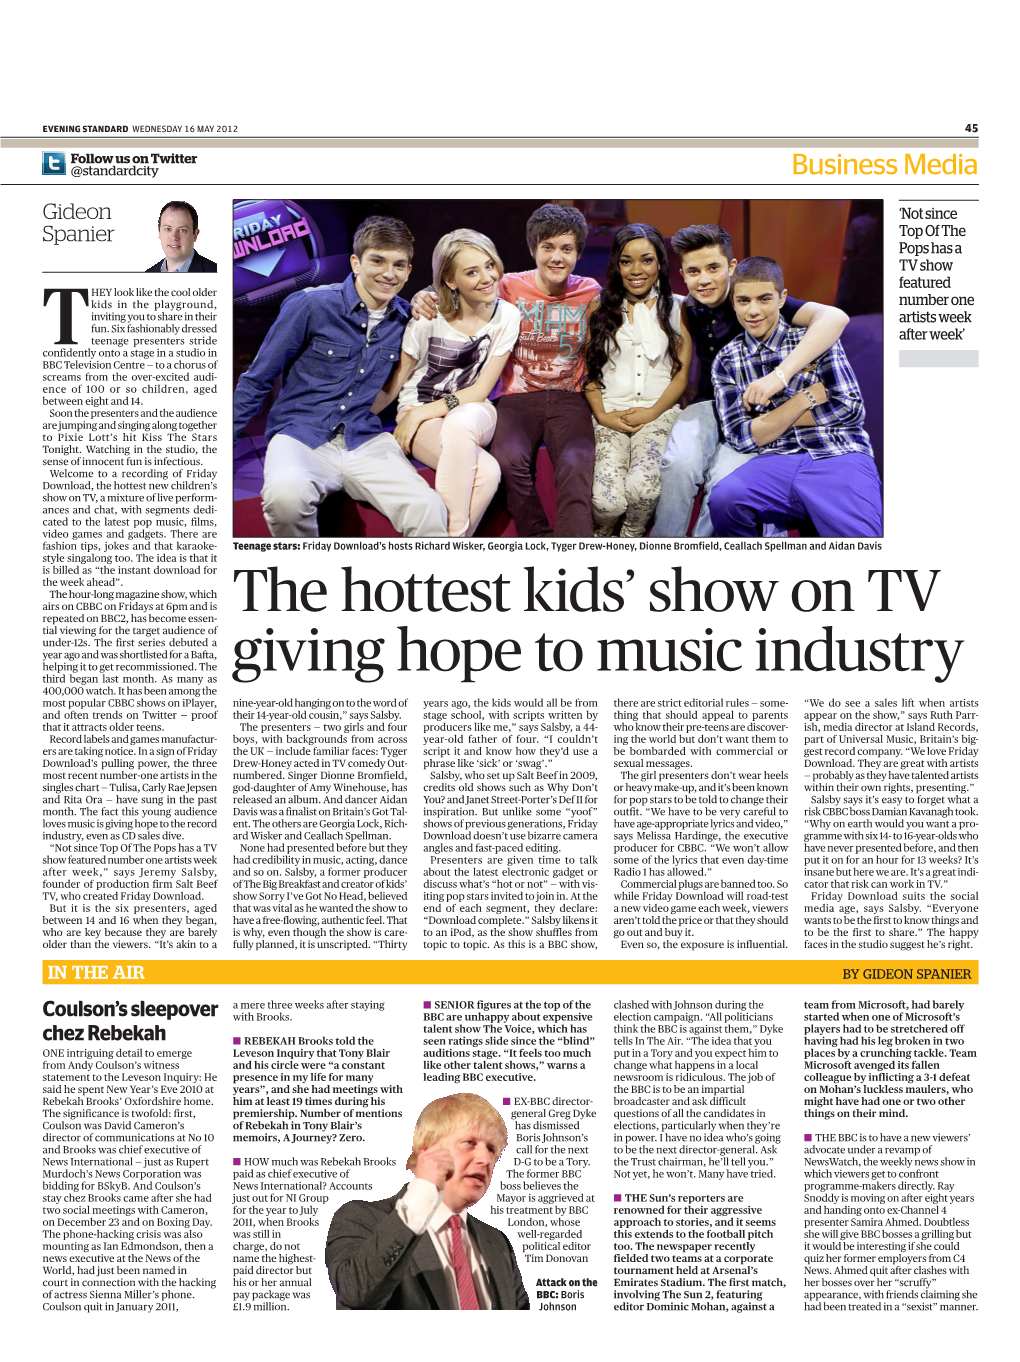 To Read the Evening Standard Article on "Friday Download"